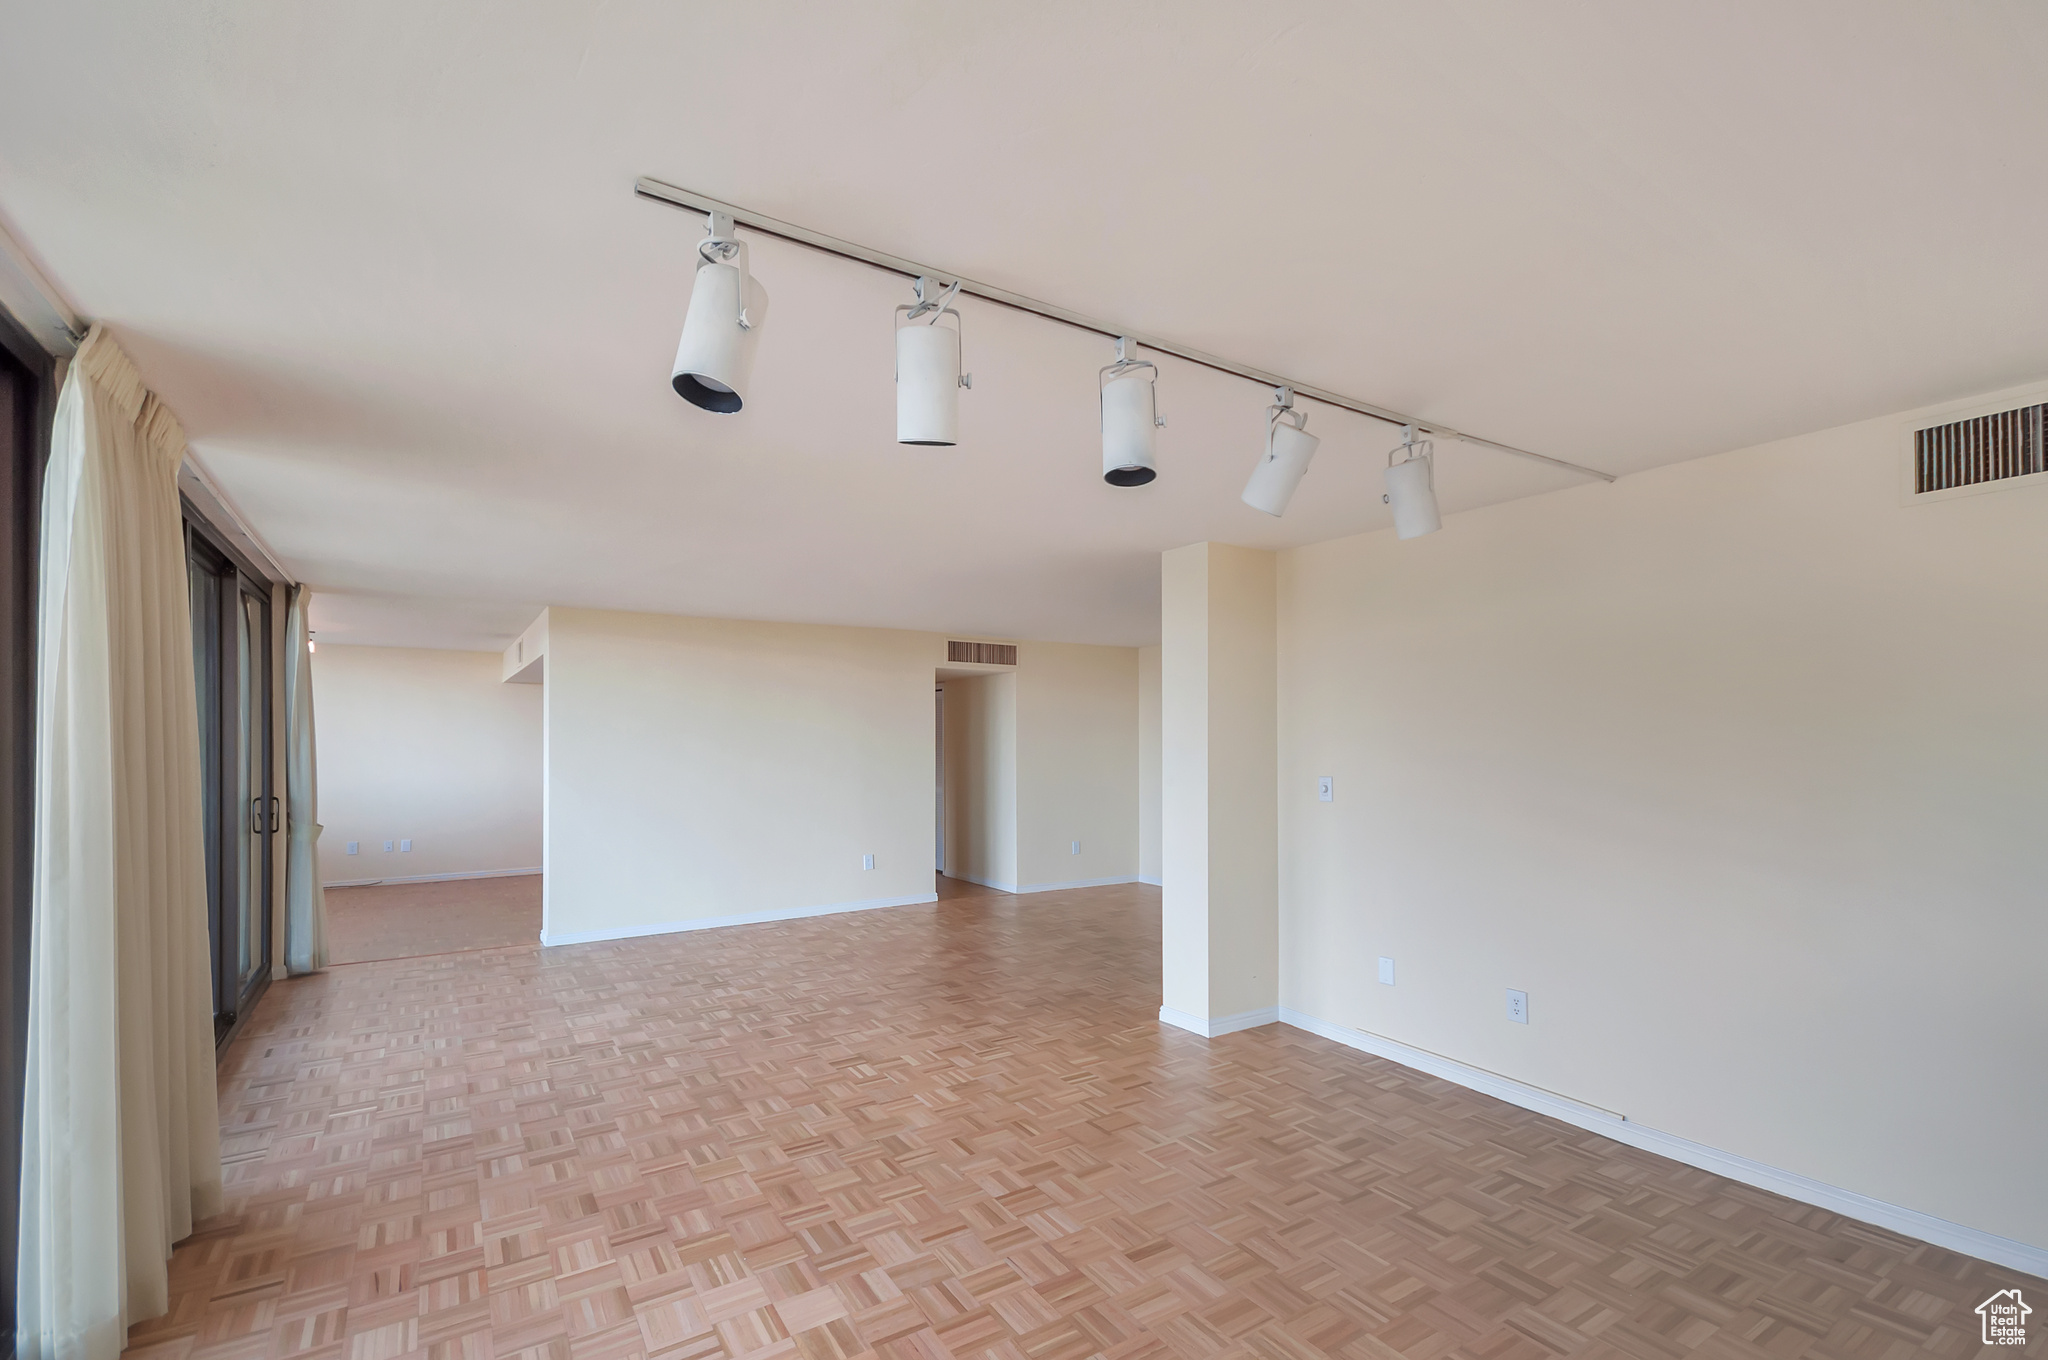 Unfurnished room with light parquet flooring